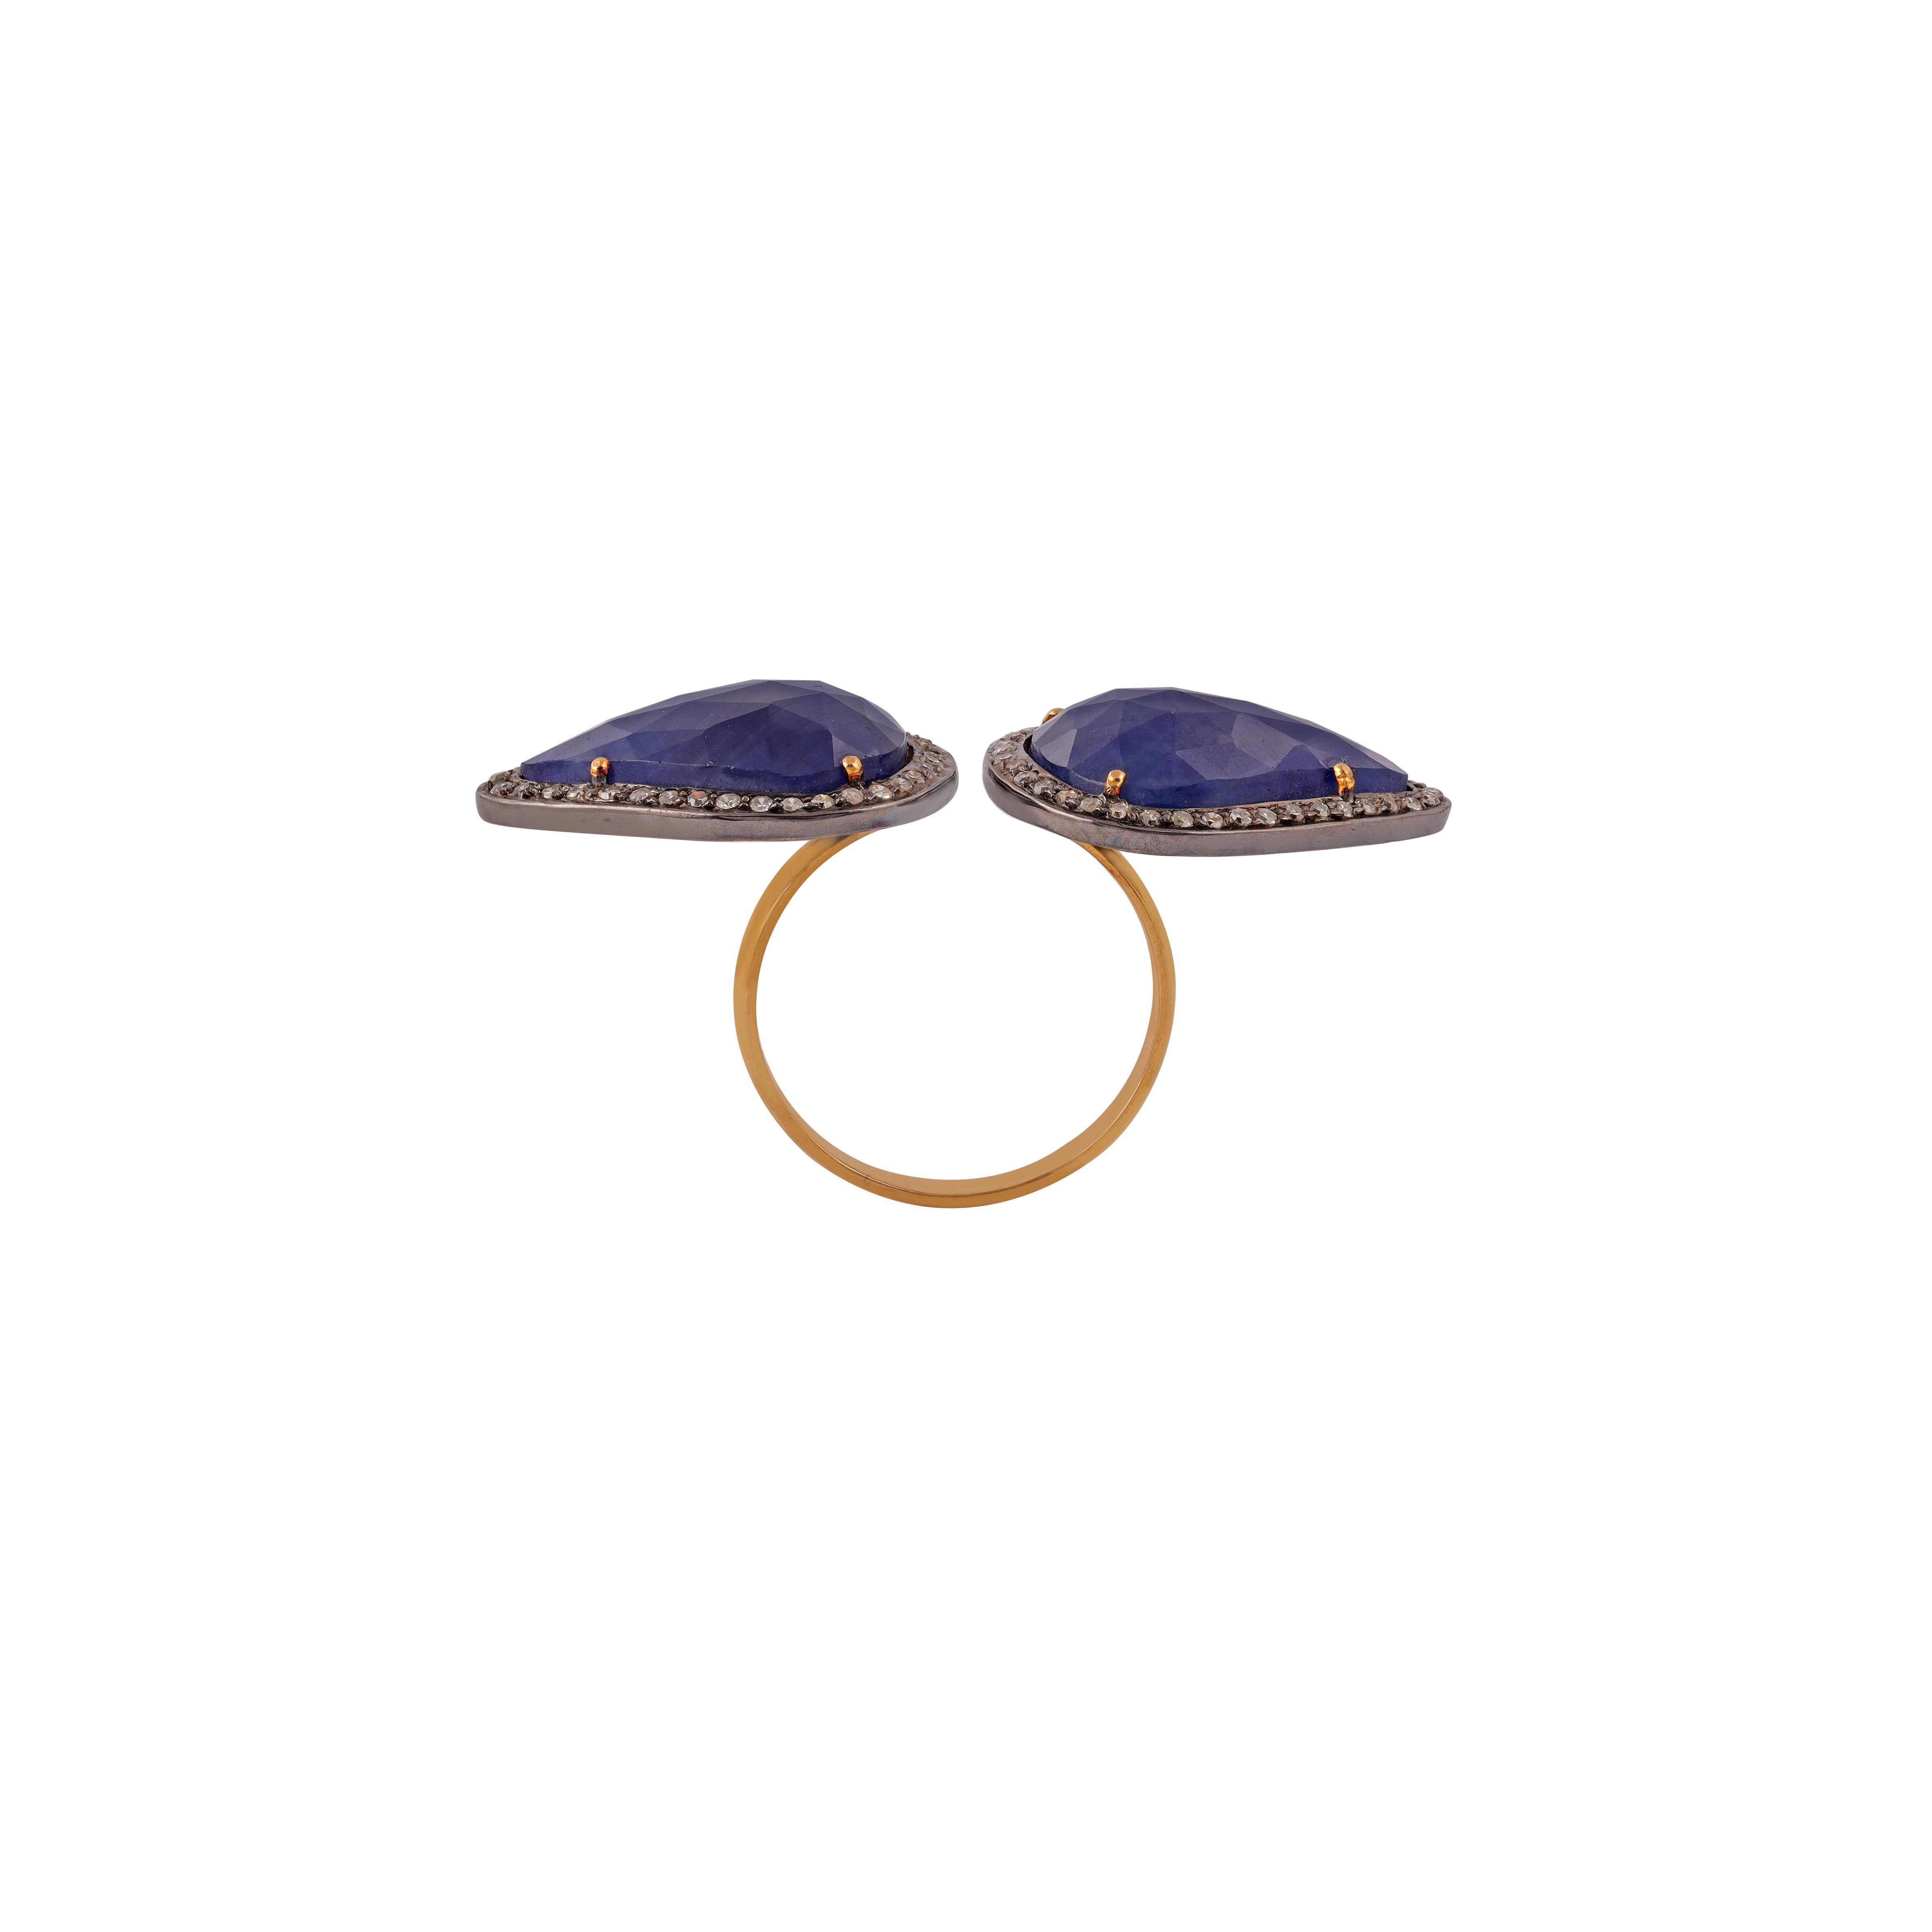 Antique Victorian 12.95 Carat Sapphire & Diamond Cocktail Ring in Gold & Silver In New Condition For Sale In Jaipur, Rajasthan